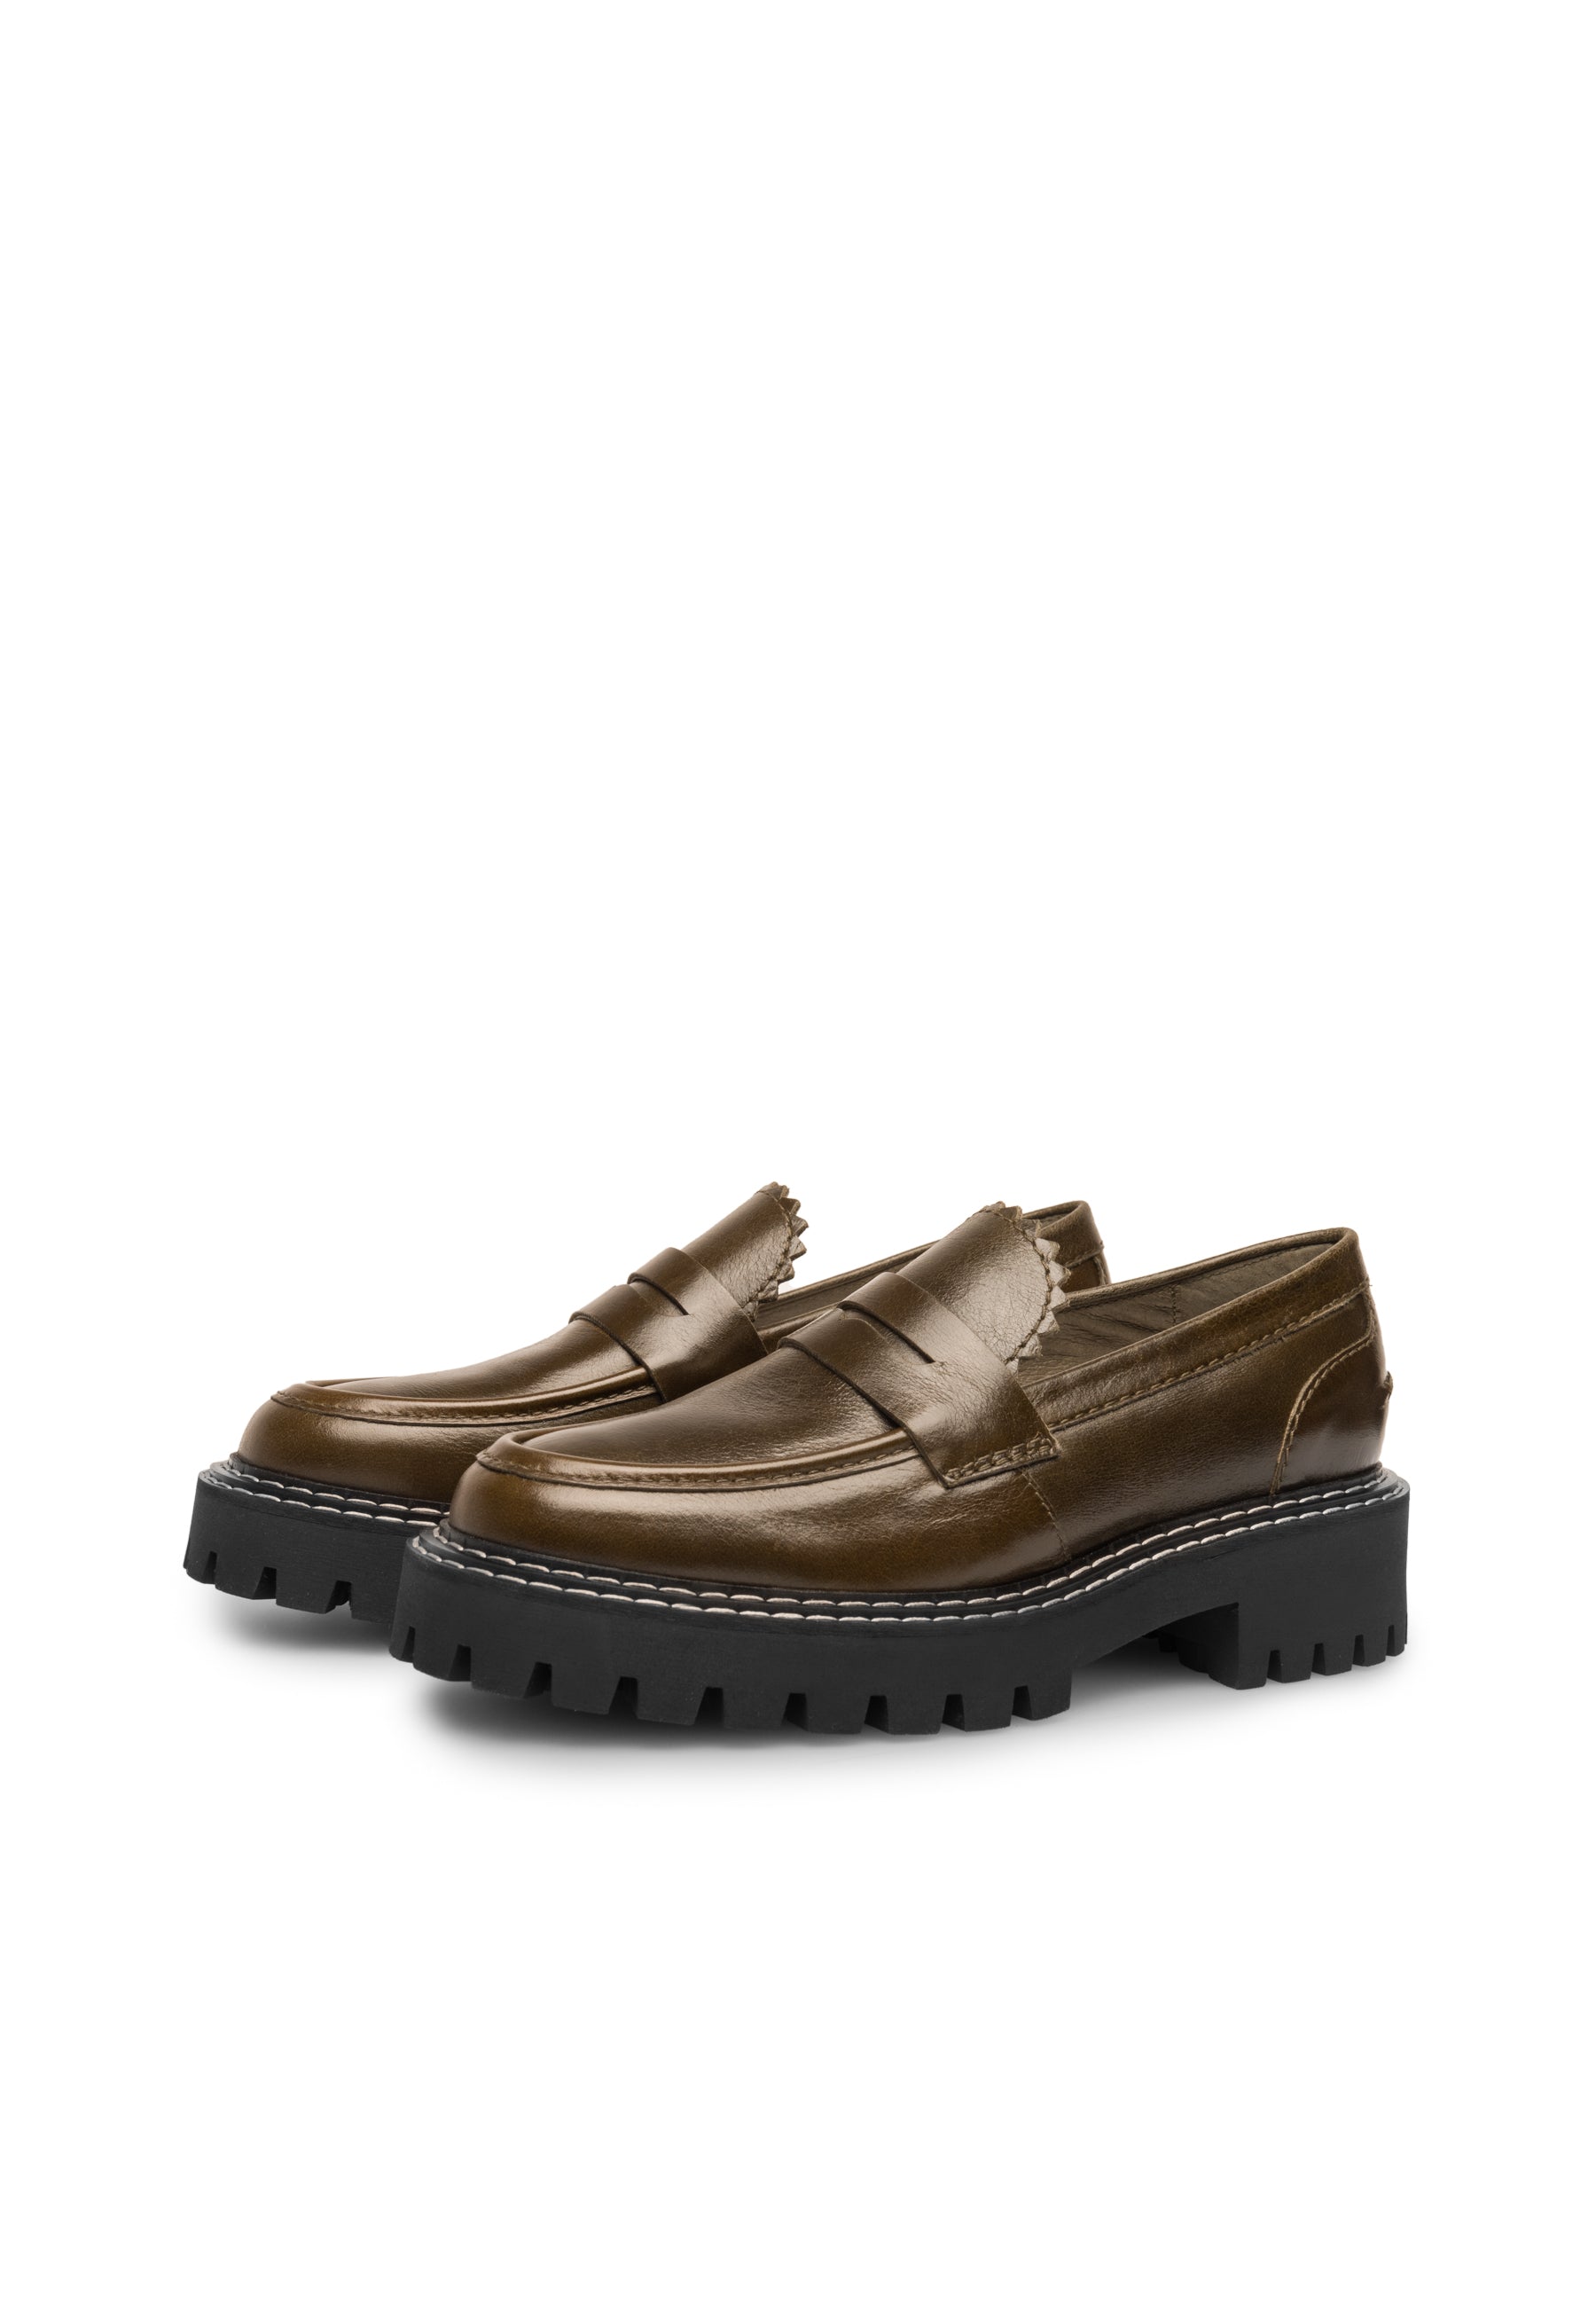 Matter Olive Leather Loafers LAST1682 - 3